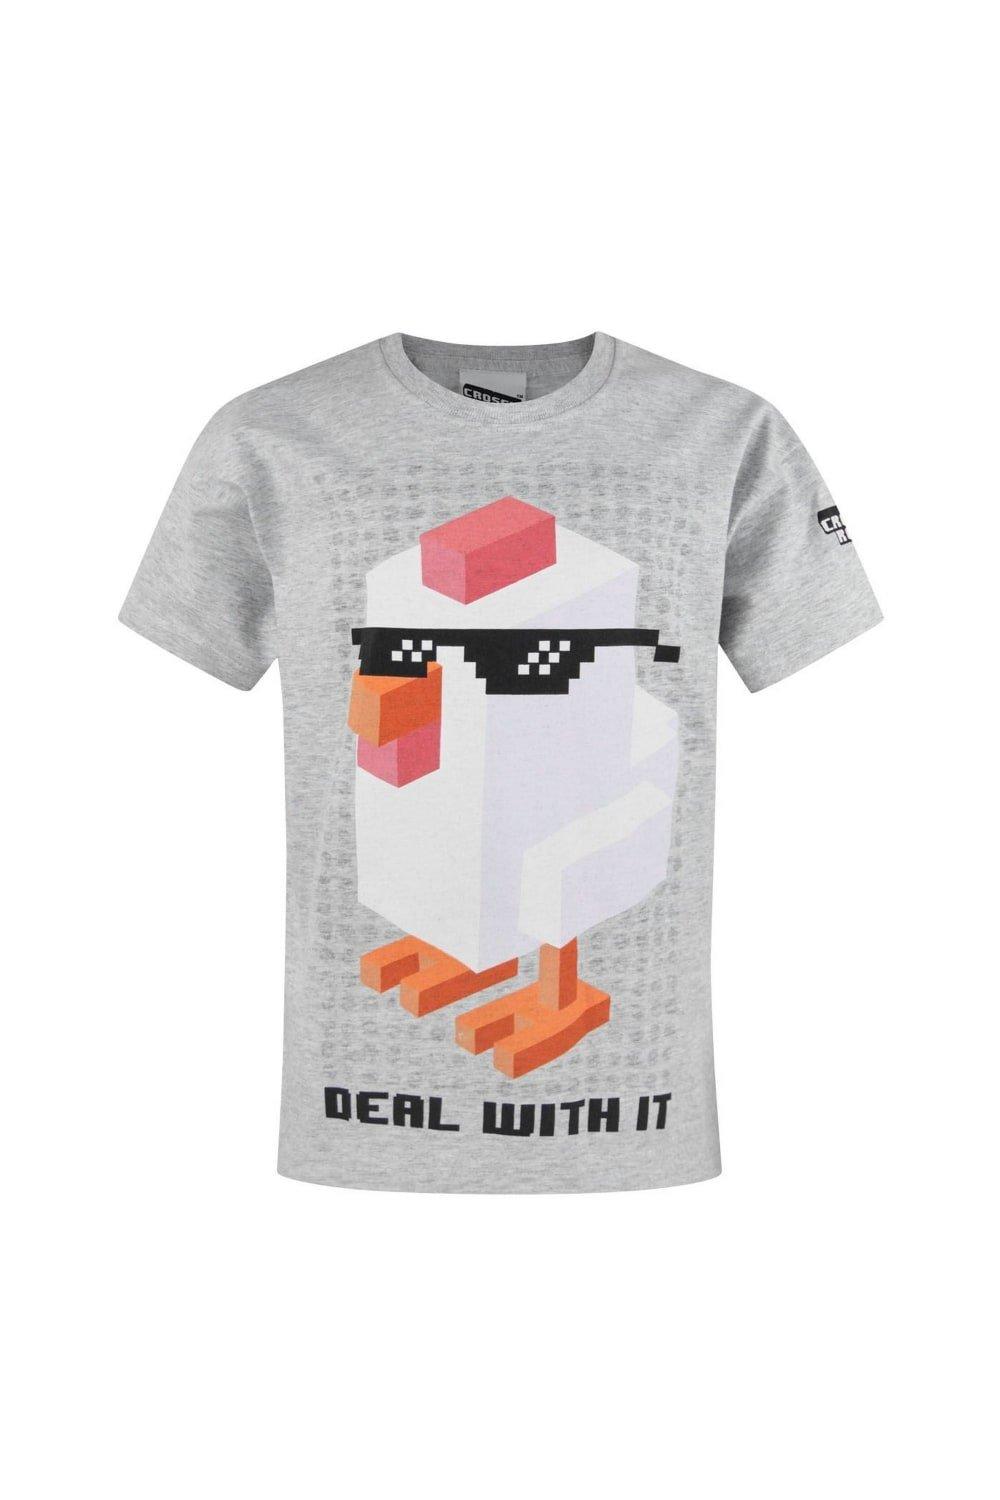 Crossy Road Official Deal With It Short Sleeved T-Shirt